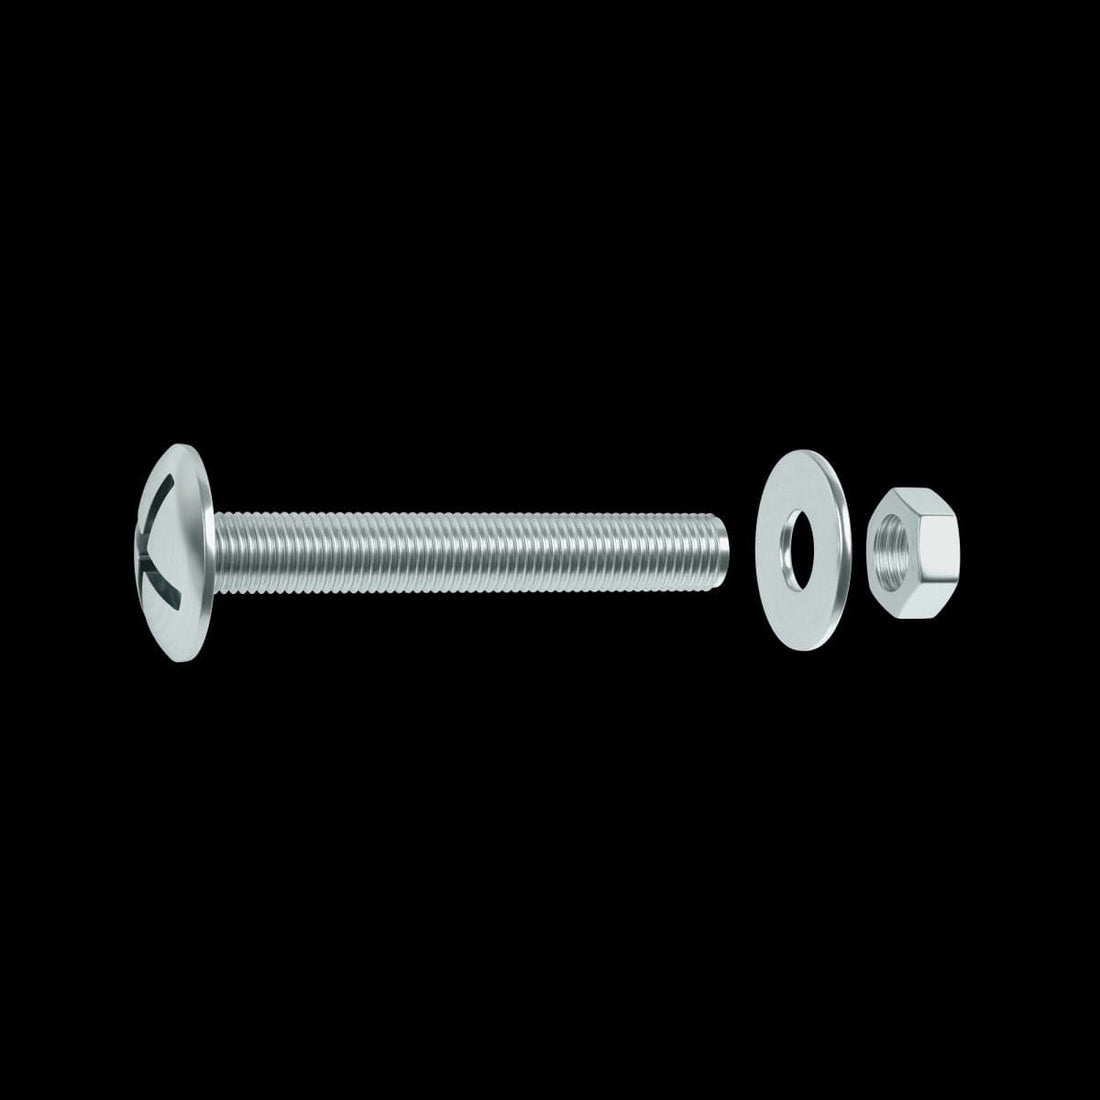 BOLT 6 X 20 MM CROSS CAMBERED HEAD, NUT AND WASHER STEEL 70 PIECES - best price from Maltashopper.com BR410006400